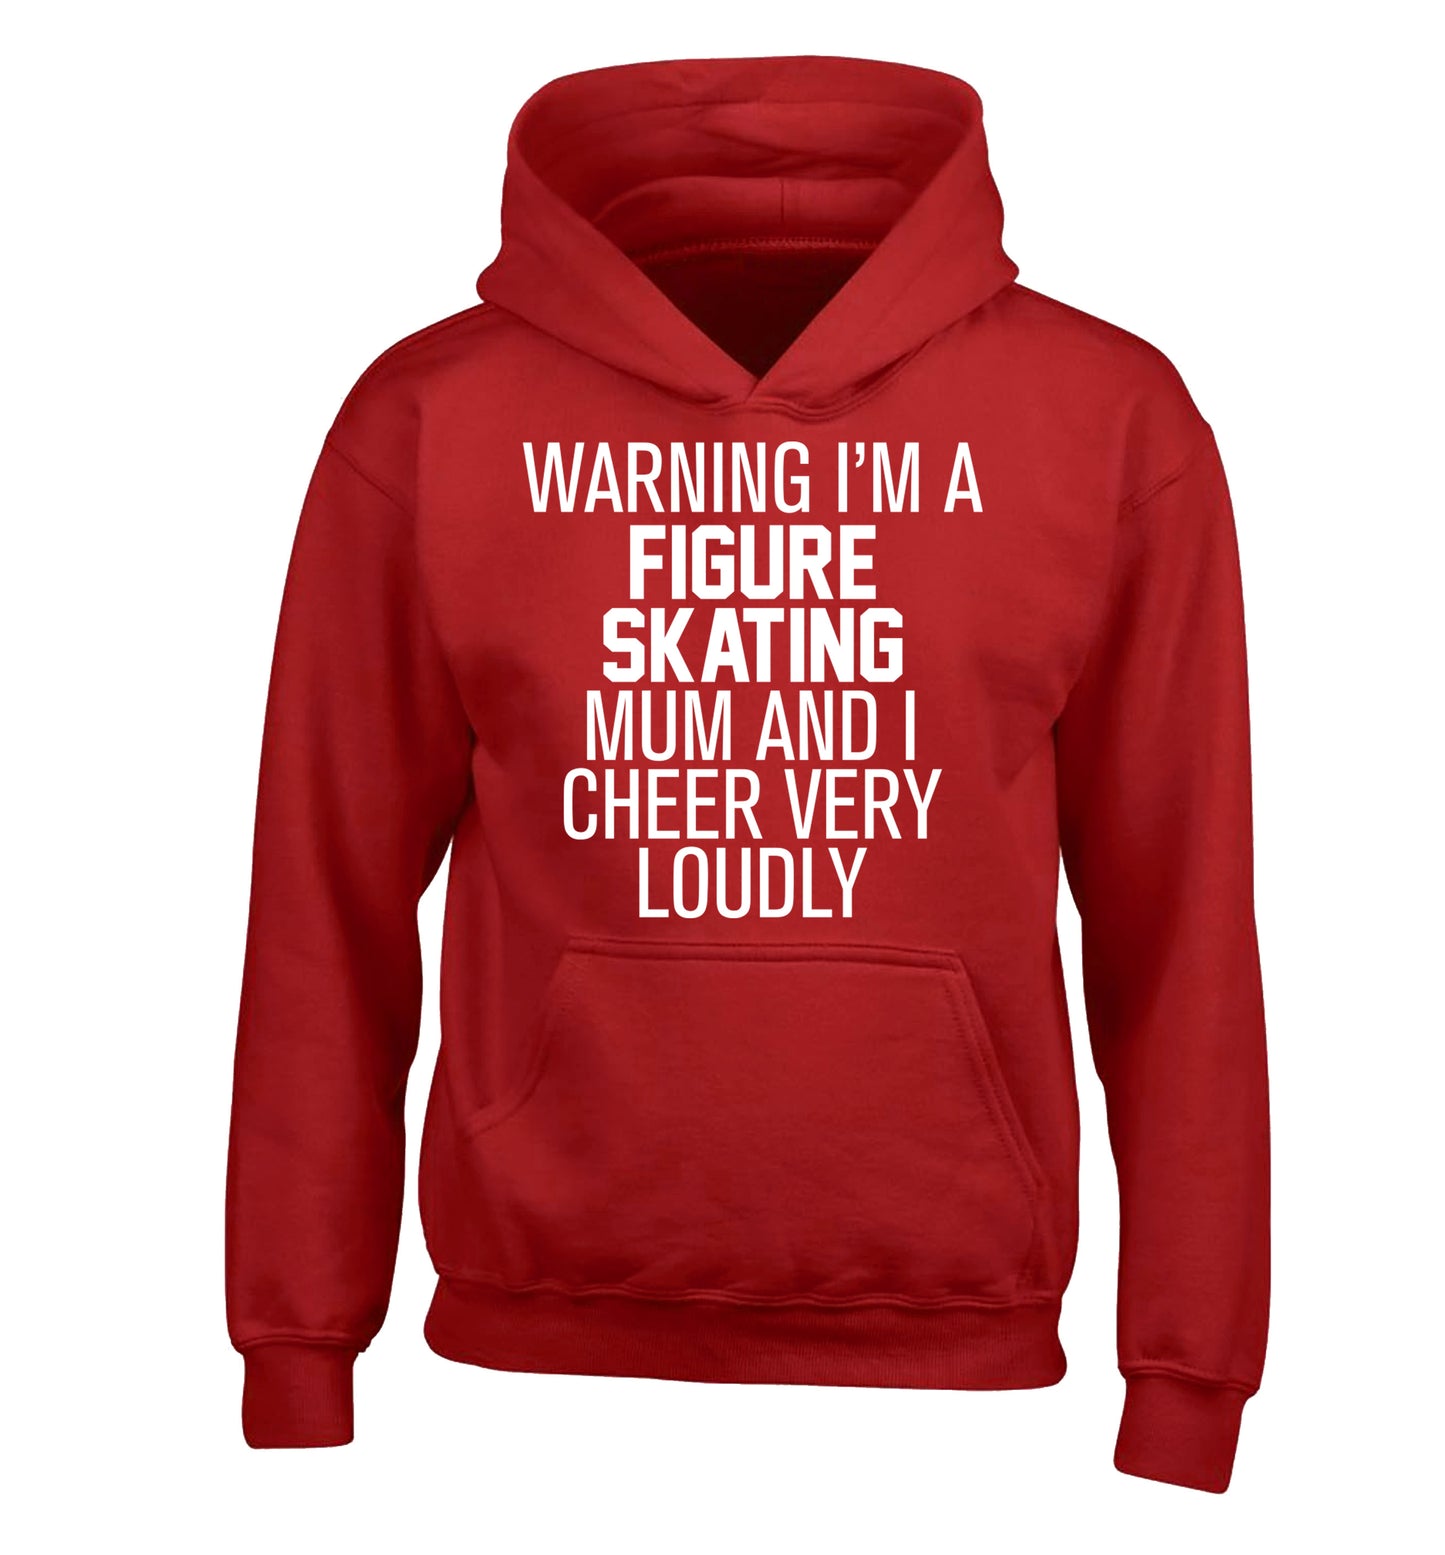 Warning I'm a figure skating mum and I cheer very loudly children's red hoodie 12-14 Years